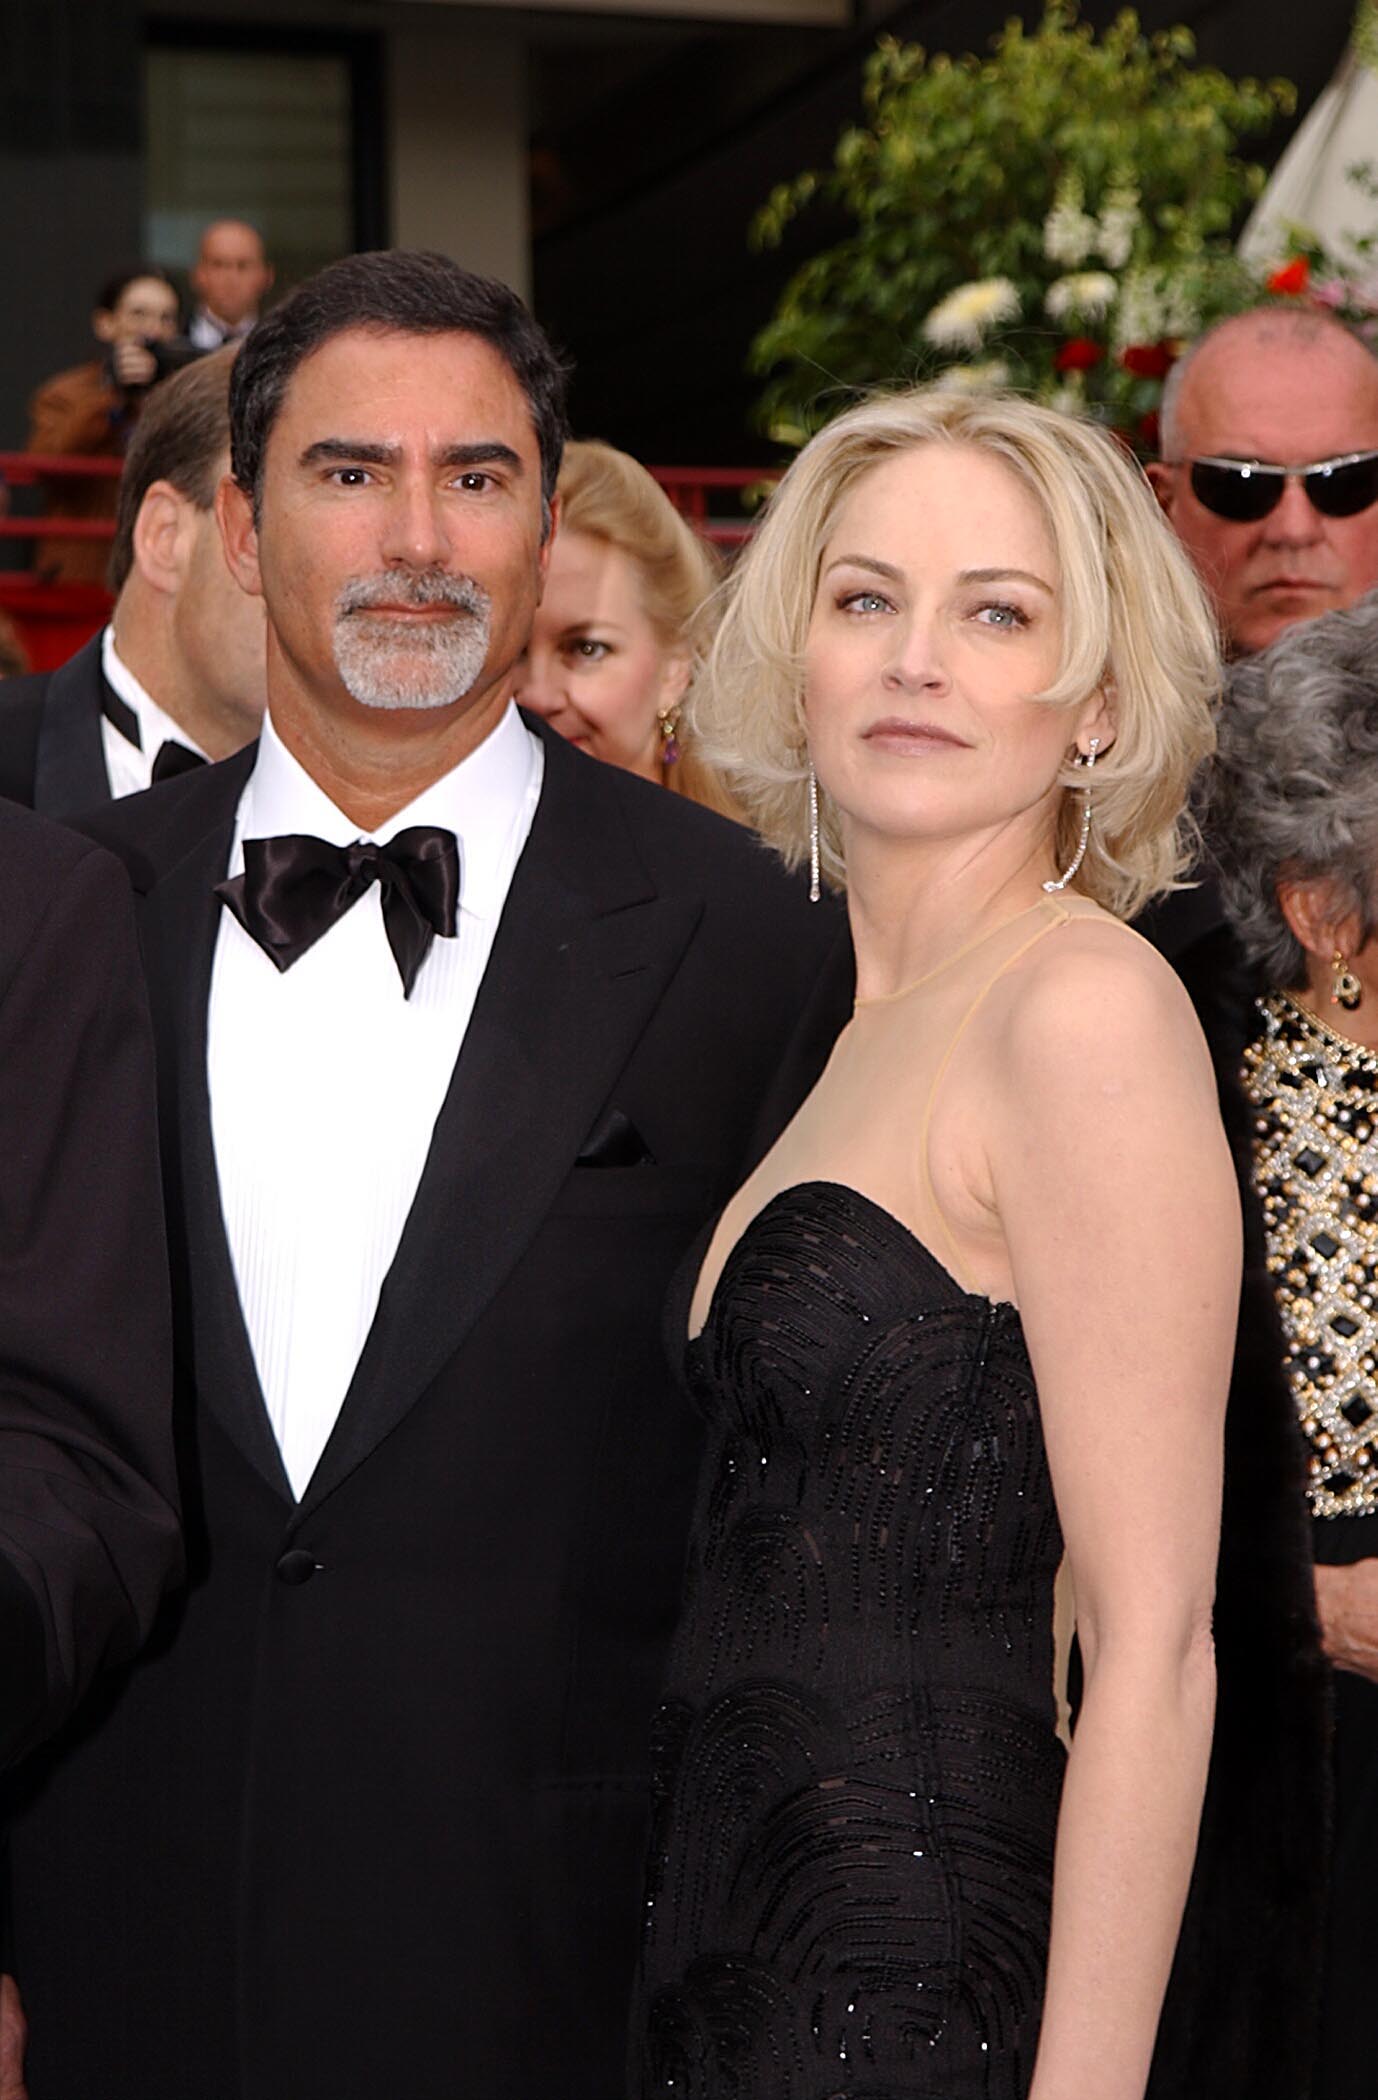 Sharon Stone and Phil Bronstein during The 74th Annual Academy Awards at Kodak Theater in Hollywood, California, United States. | Source: Getty Images